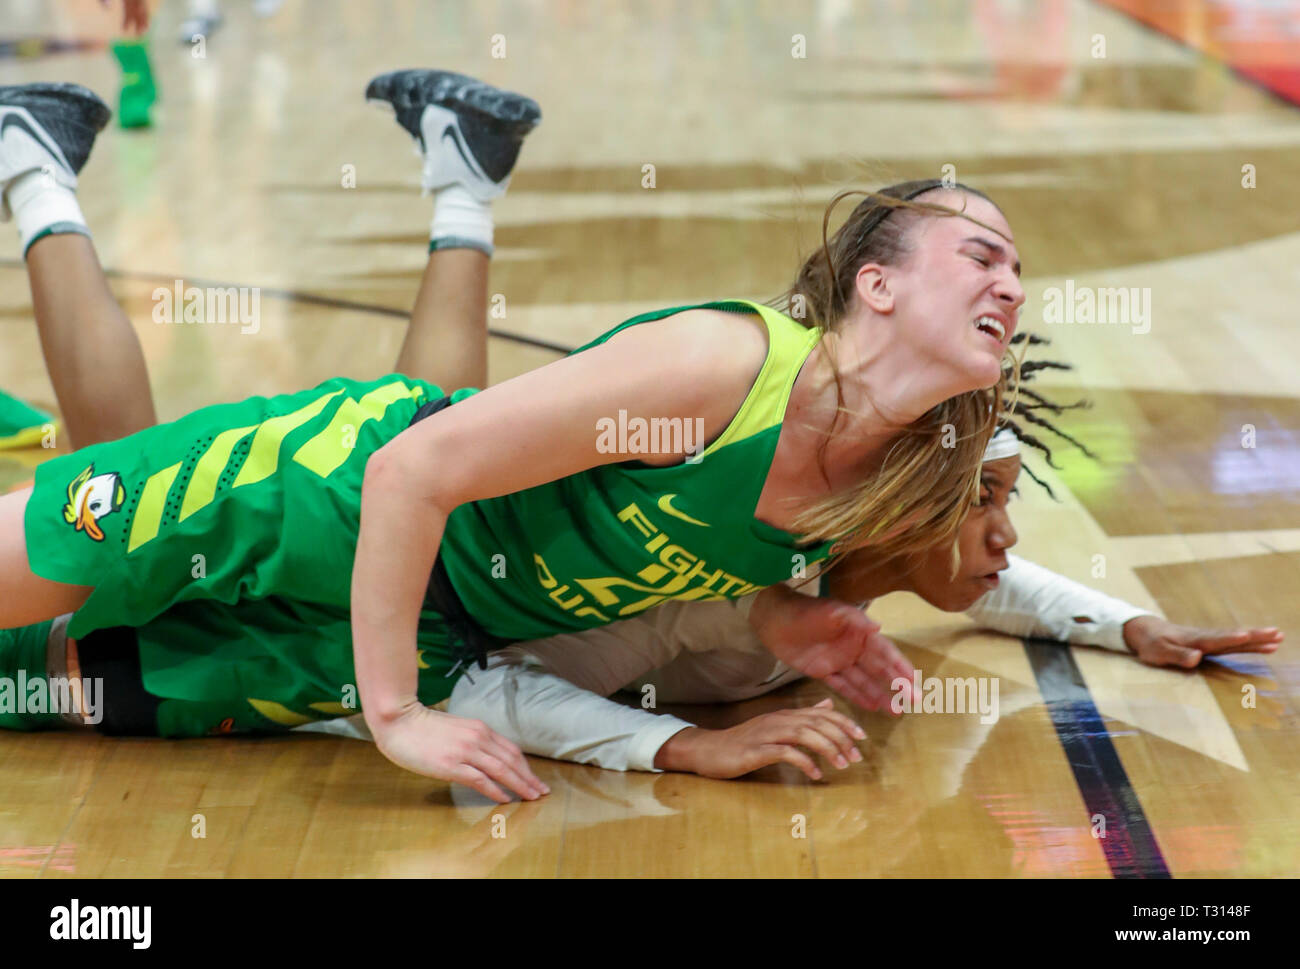 Tampa, Florida, USA. 5th Apr, 2019. DIRK SHADD | Times.Oregon Ducks guard Sabrina Ionescu (20) falls to the floor along with Baylor Lady Bears guard Juicy Landrum (20) while chasing the loose ball during the second half of their NCAA Women's Final Four semi-final game Friday, April 5, 2019 in Tampa. Credit: Dirk Shadd/Tampa Bay Times/ZUMA Wire/Alamy Live News Stock Photo